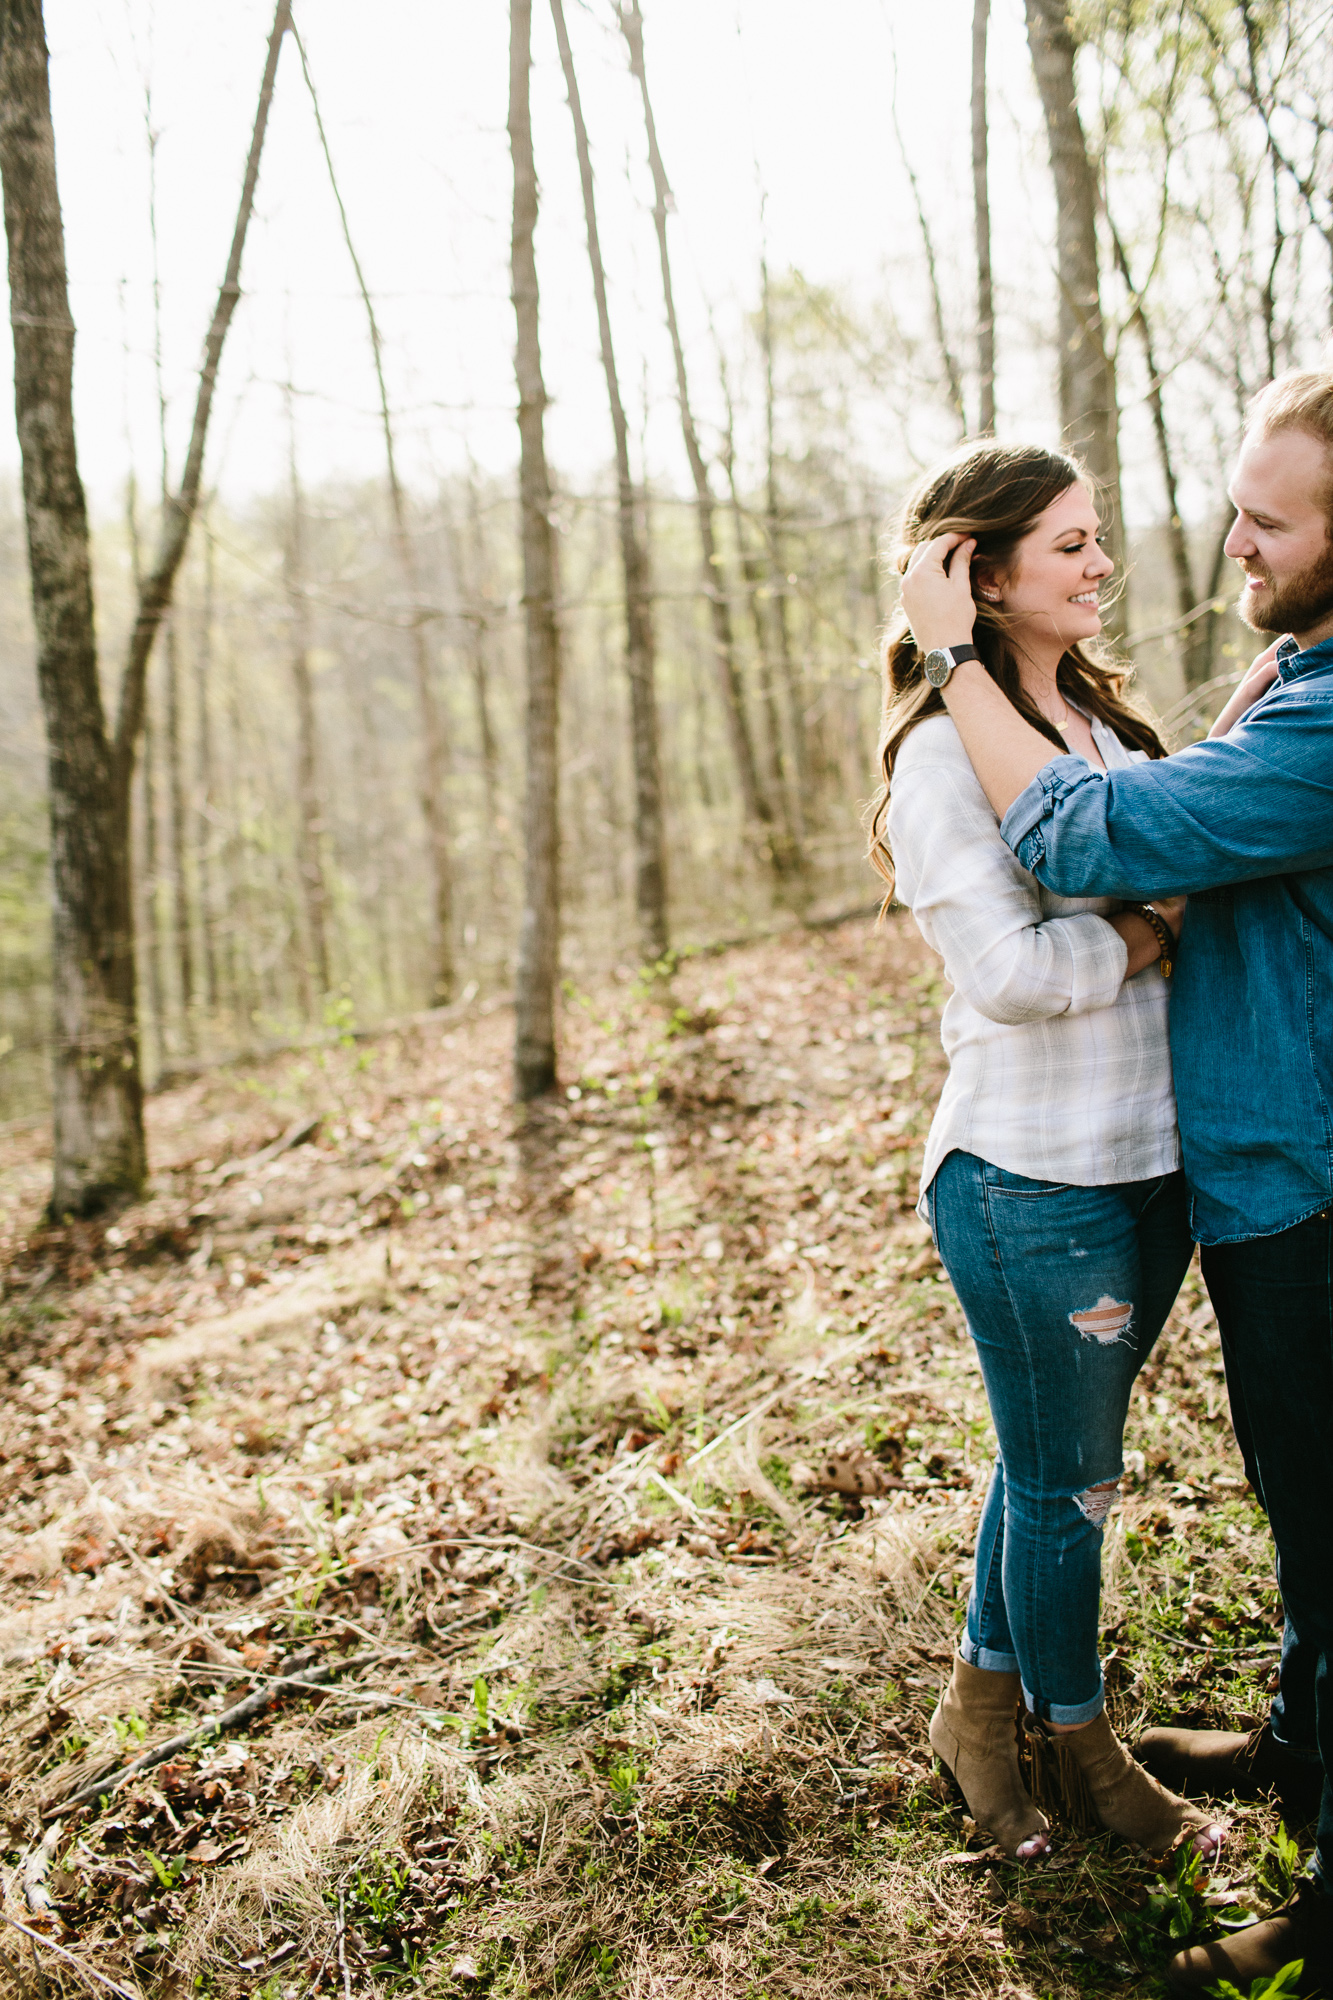 Outdoorsy Adventure Engagement Photos - Moonshine Hill Wedding - High Five for Love Photography -- Wedding Blog - The Overwhelmed Bride